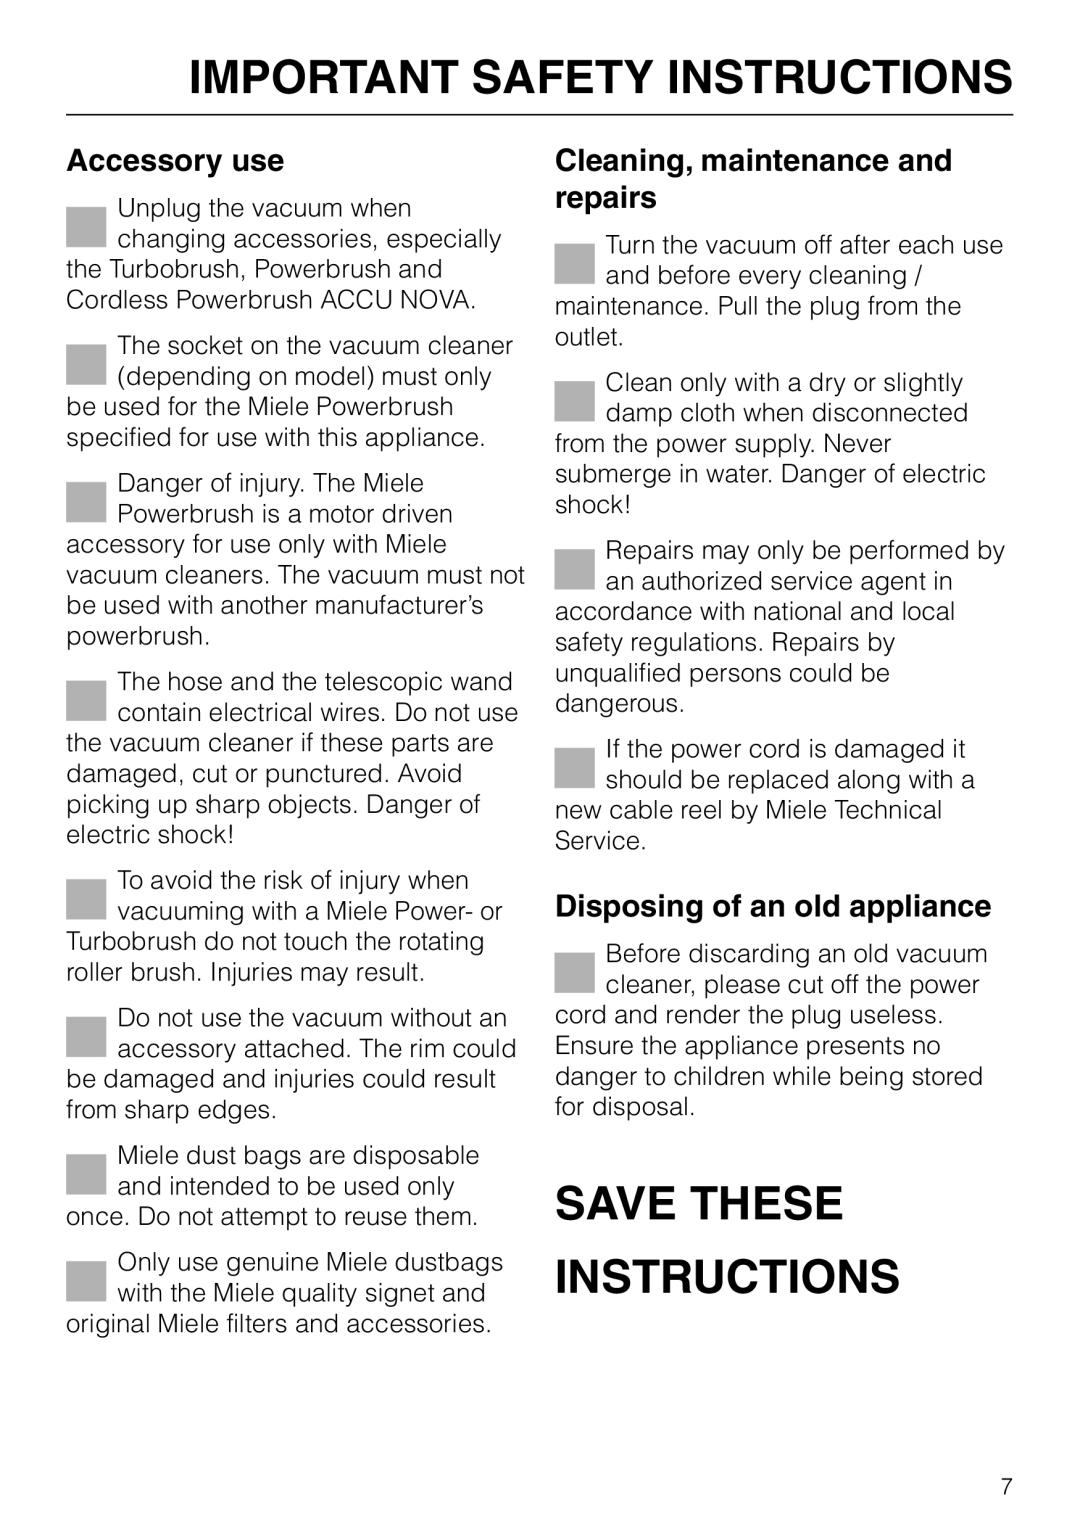 Miele S 5000 Save These Instructions, Accessory use, Cleaning, maintenance and repairs, Disposing of an old appliance 